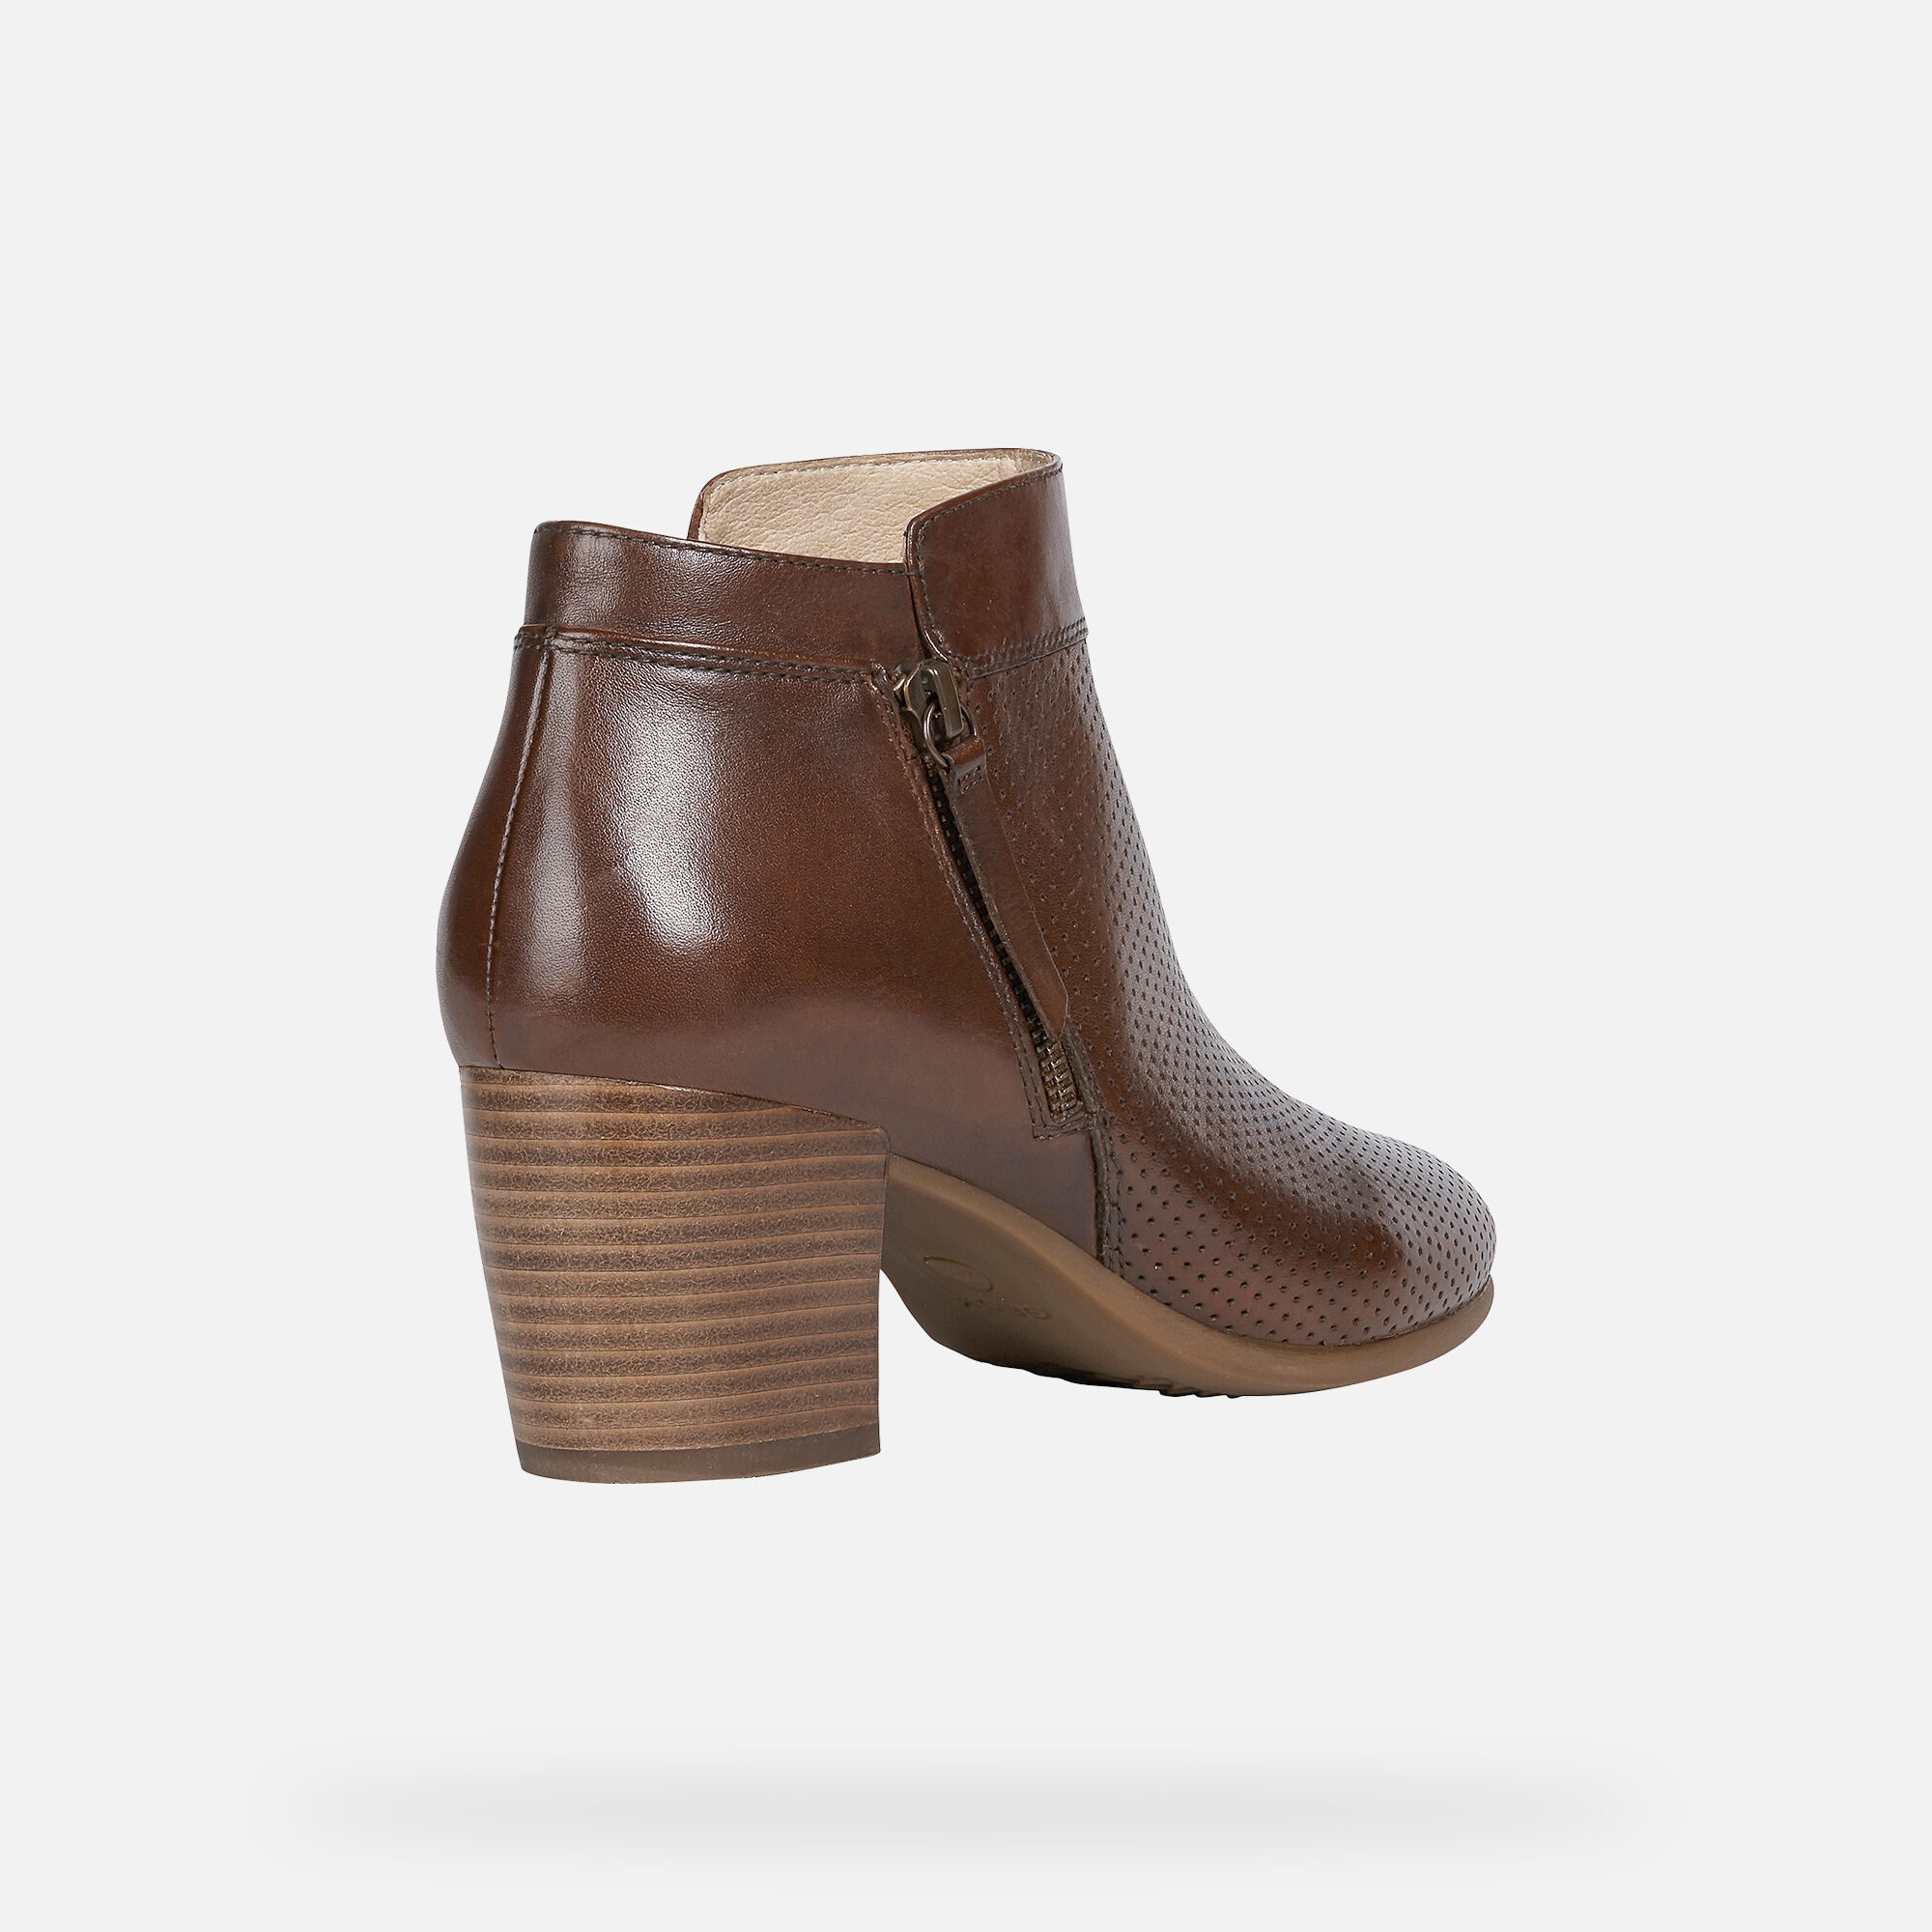 Geox NEW LUCINDA Woman: Chestnut Ankle 